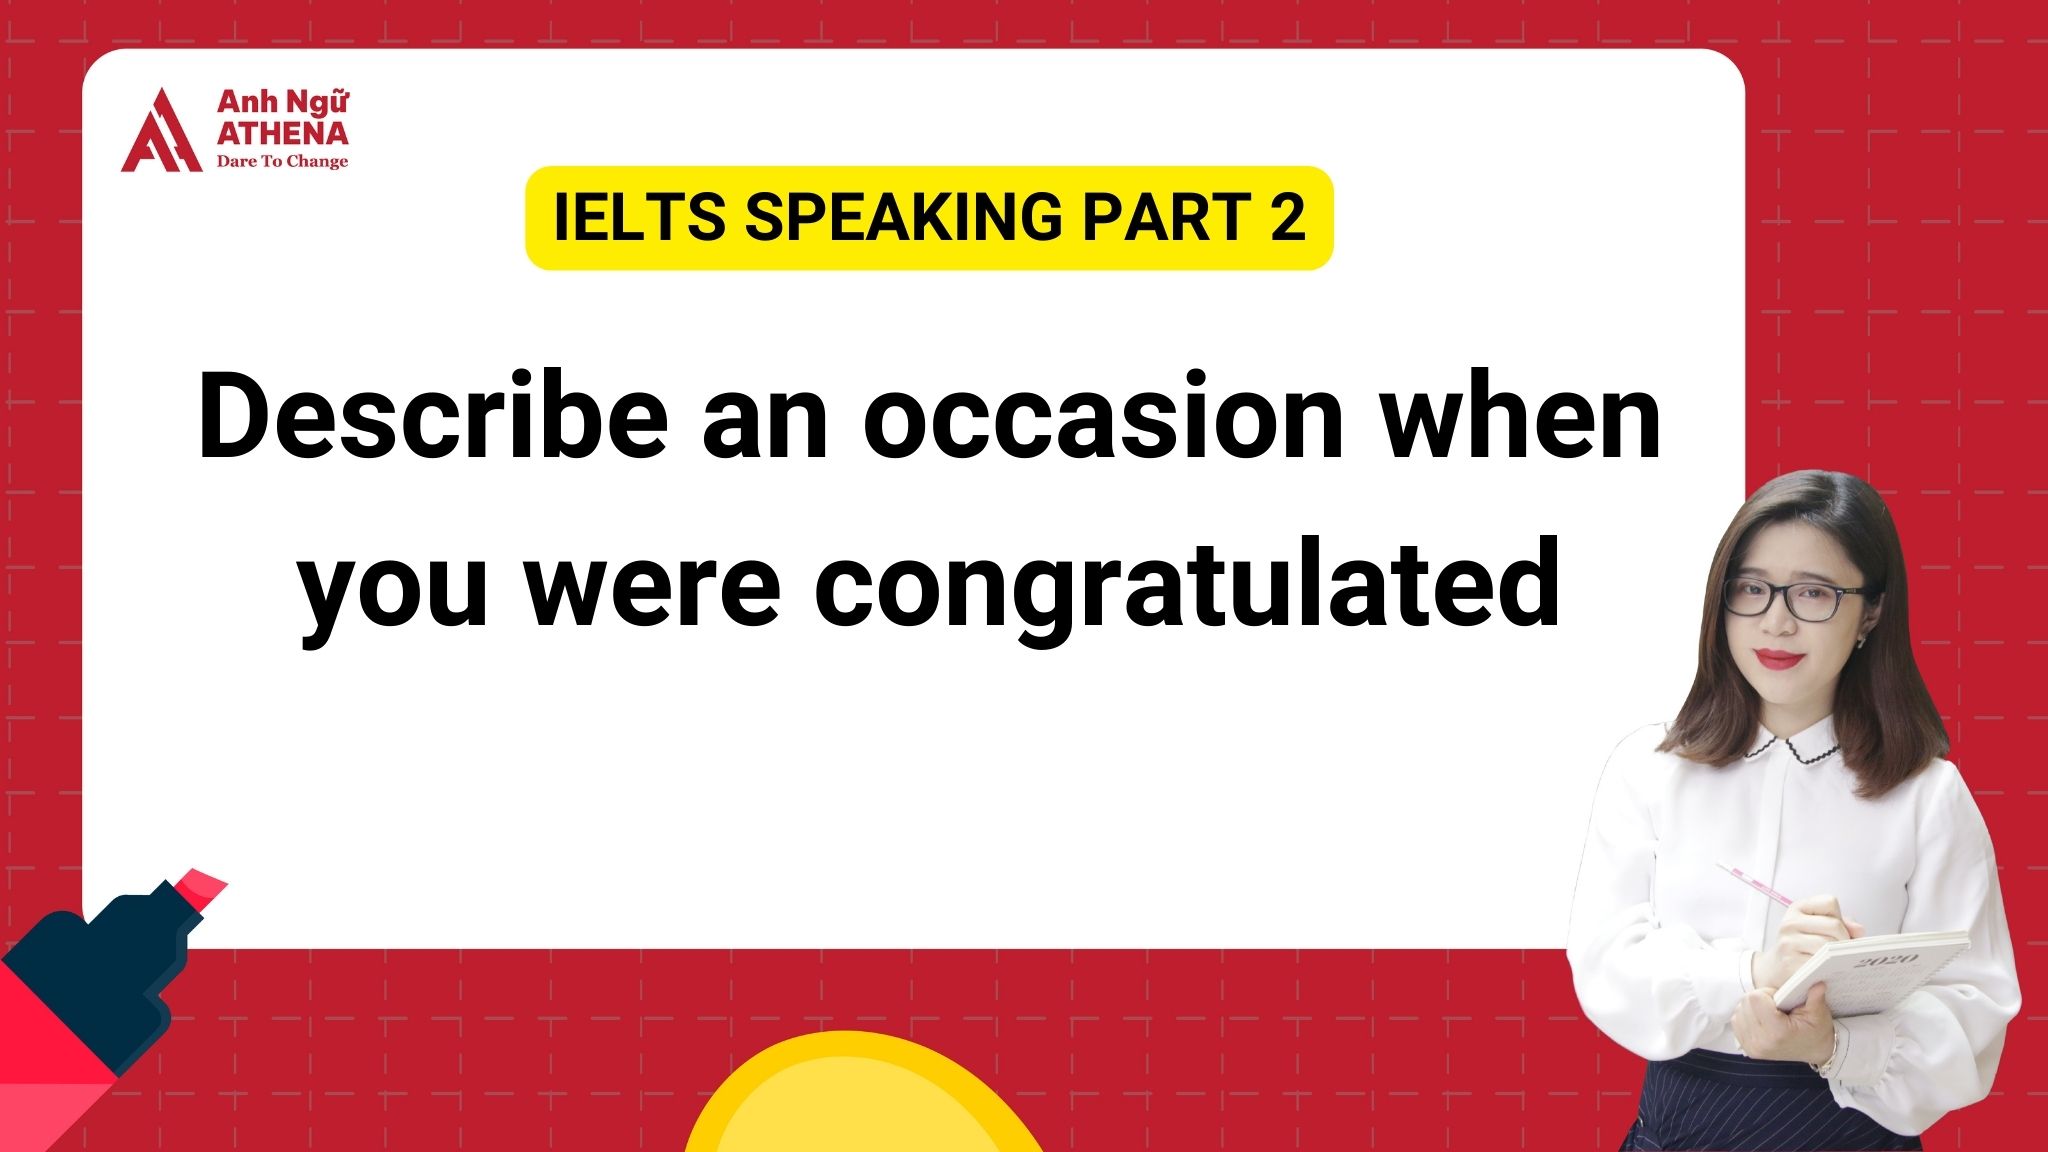 Giải đề IELTS Speaking Part 2: Describe an occasion when you were congratulated